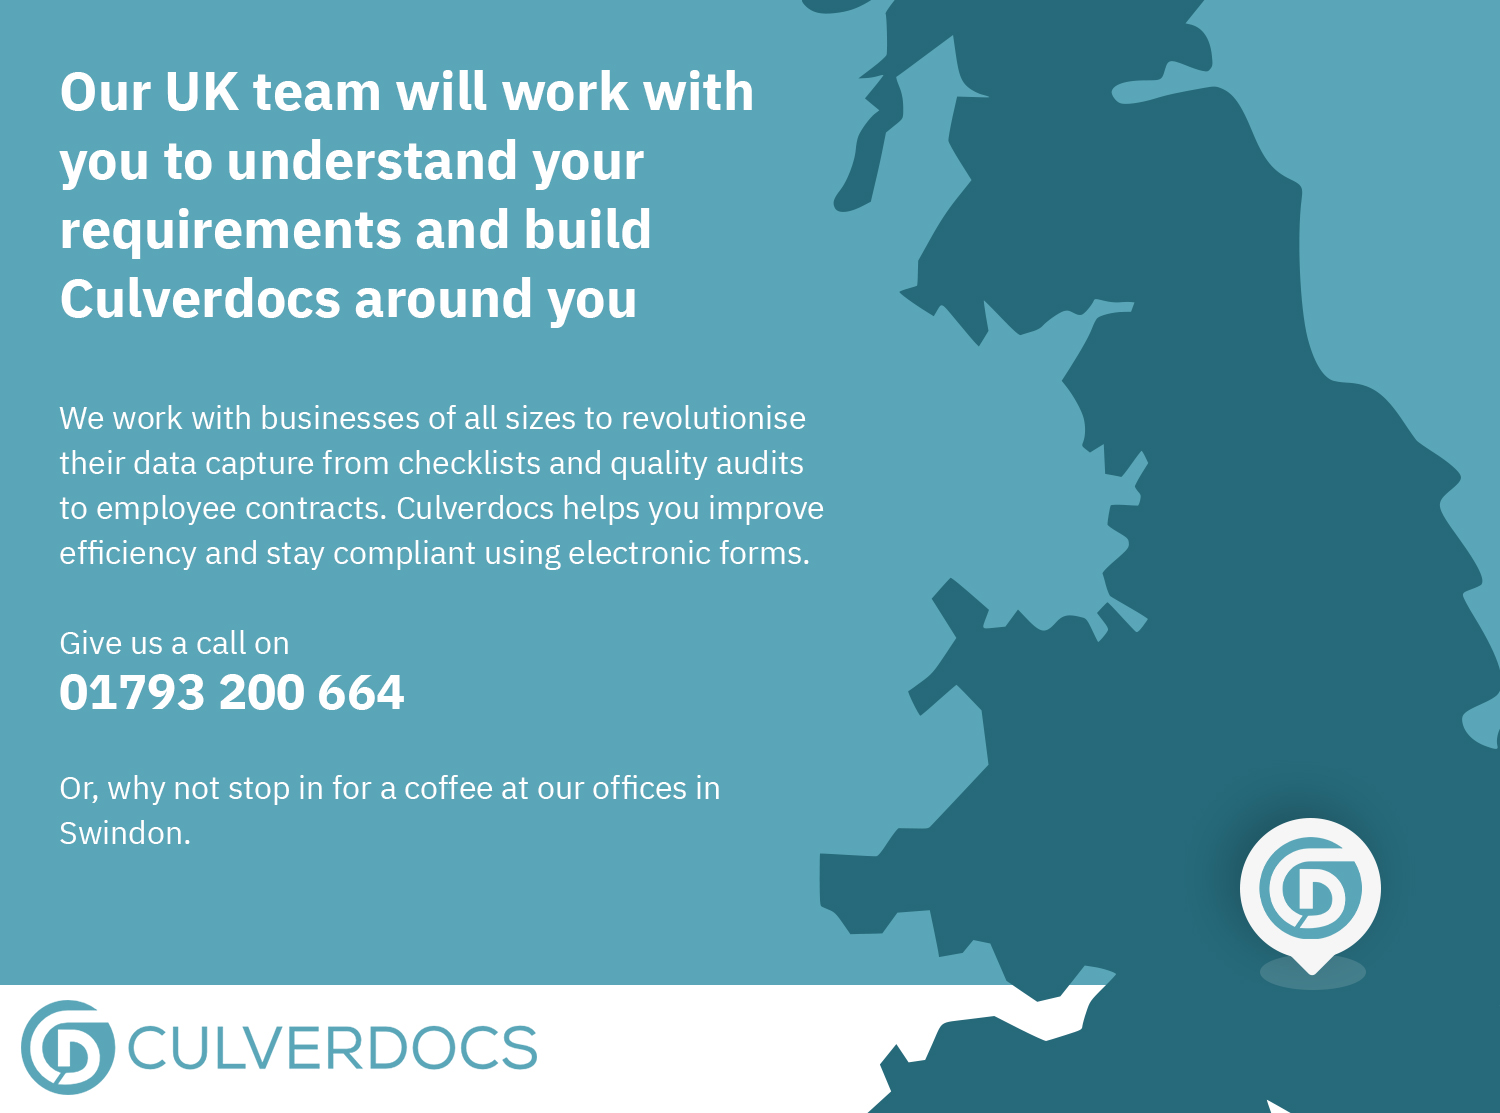 Our UK team will work with you to understand your requirements and build Culverdocs around you